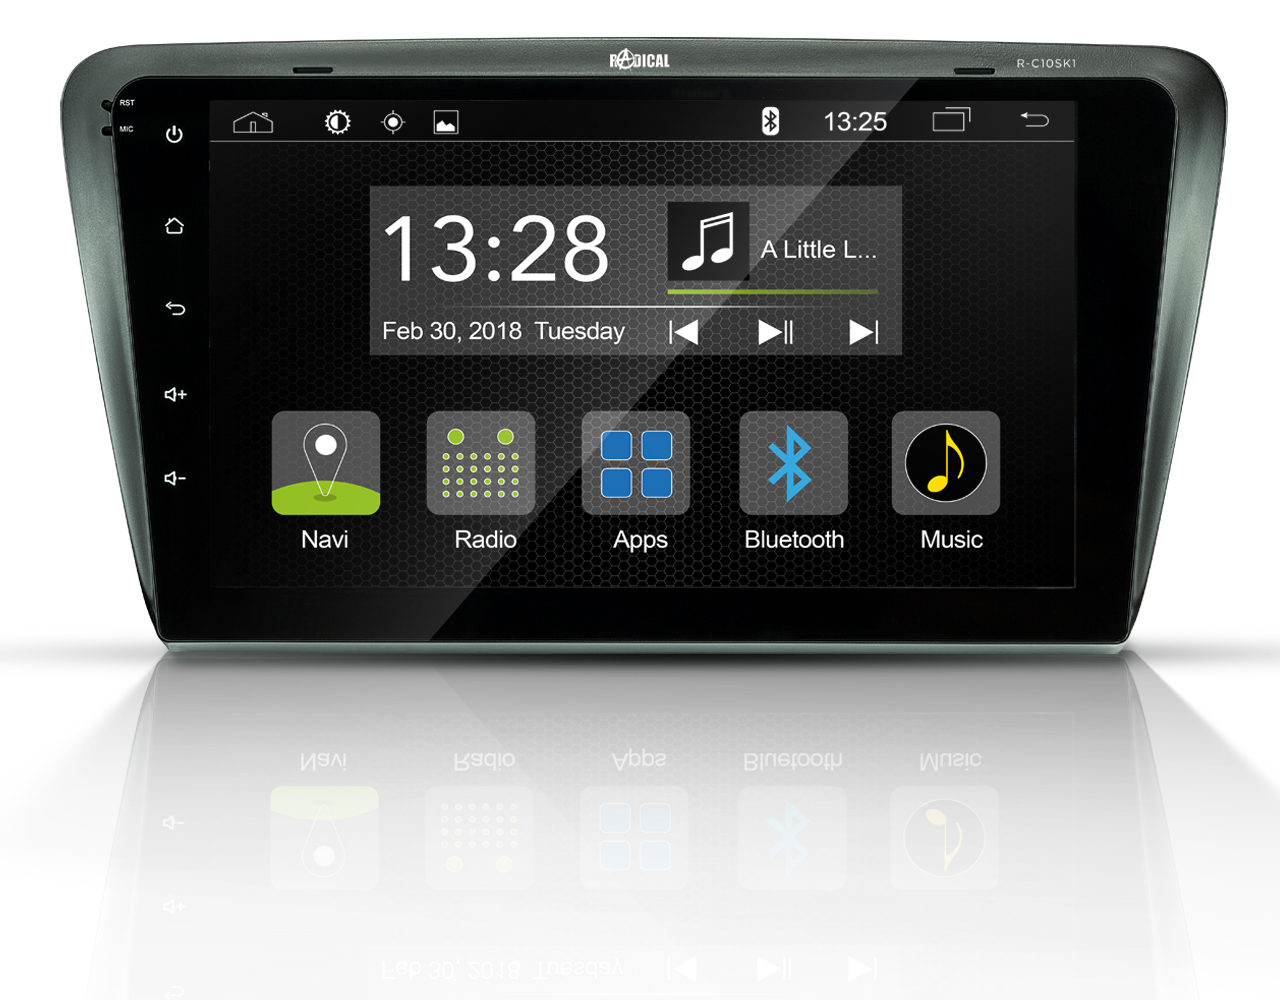 RADICAL R-C10SK1 Skoda Infotainment Android T8